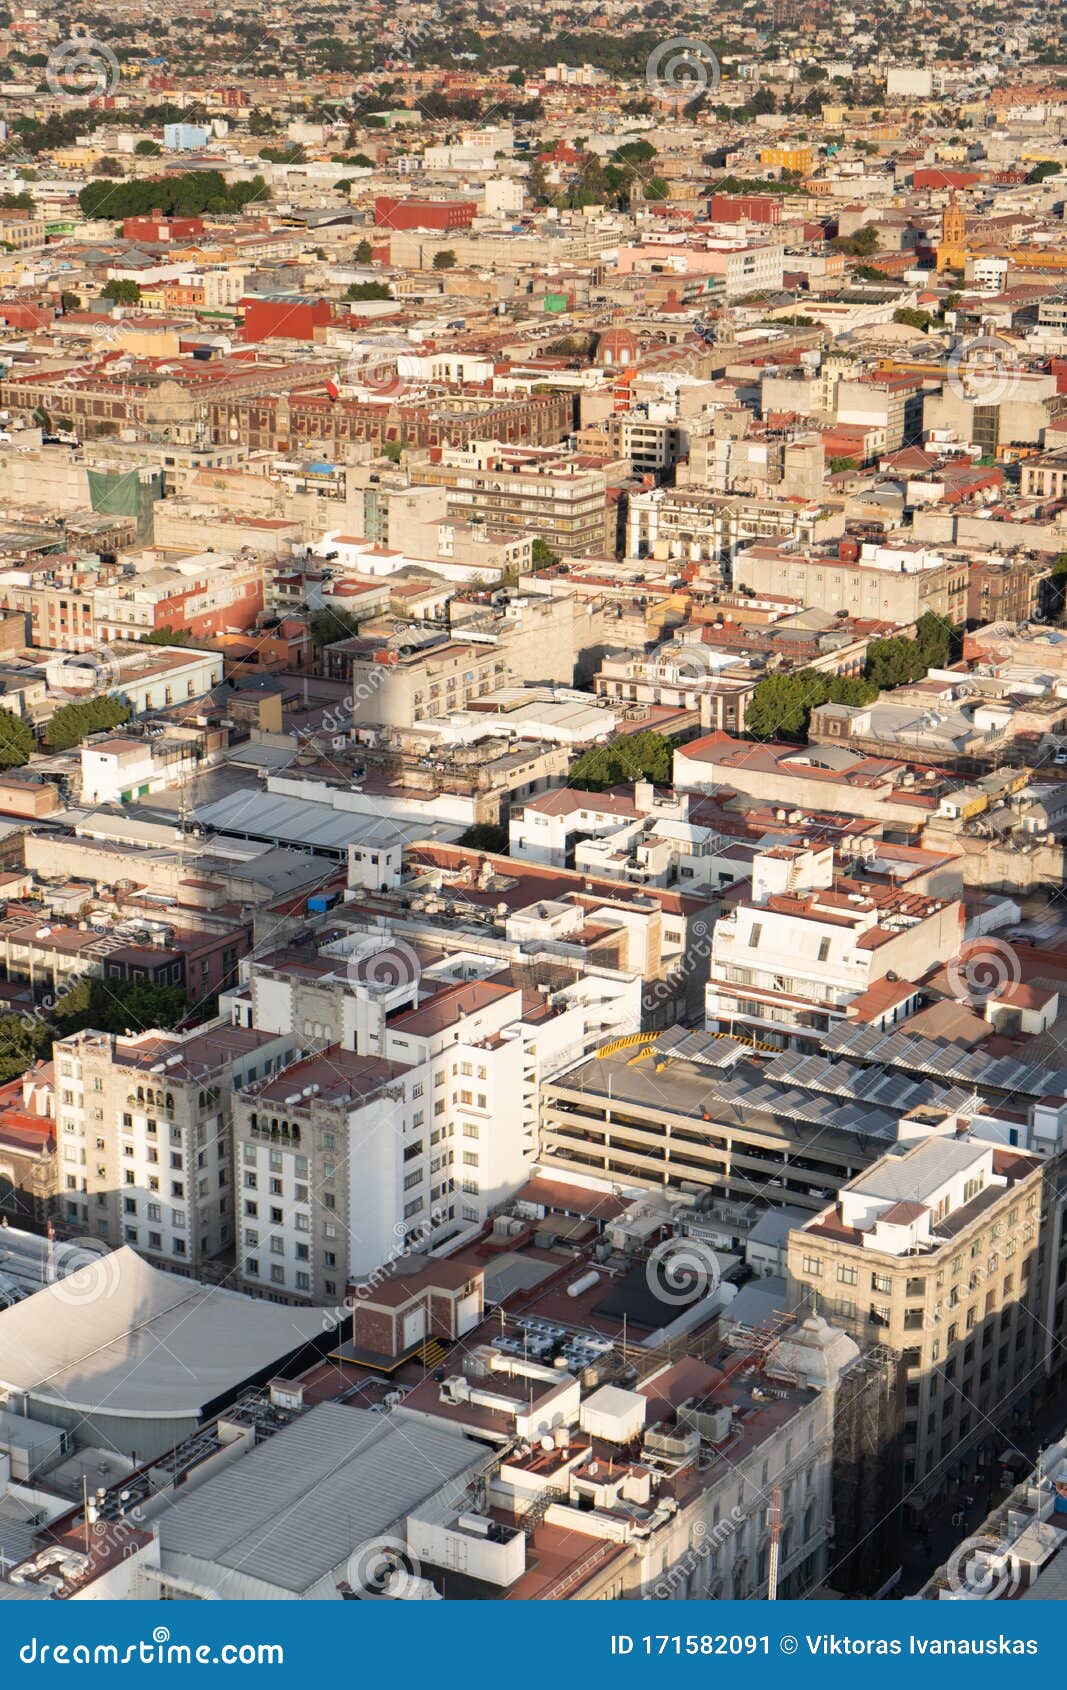 panorama of mexico city central part from skyscraper latino americano. view with buildings. travel photo, background